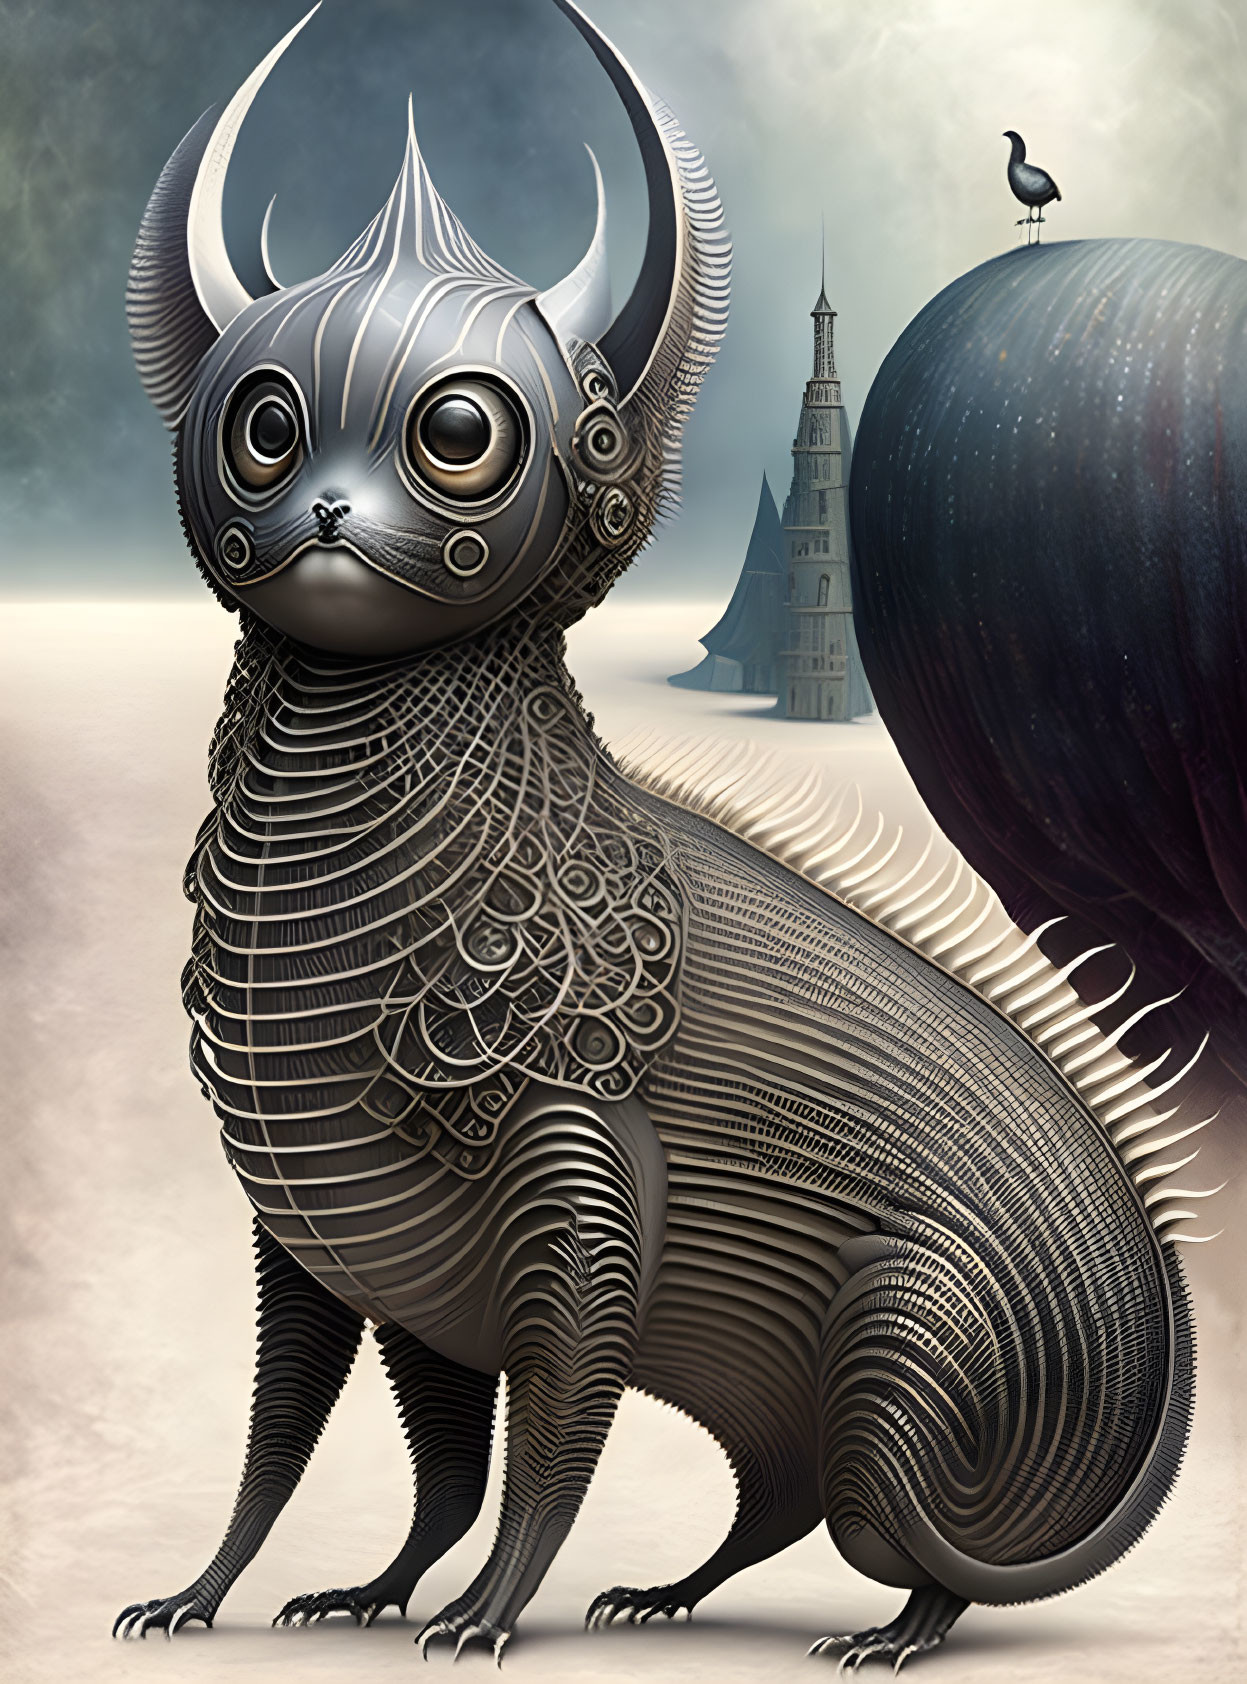 Elaborately patterned cat-like creature with horns in surreal setting.